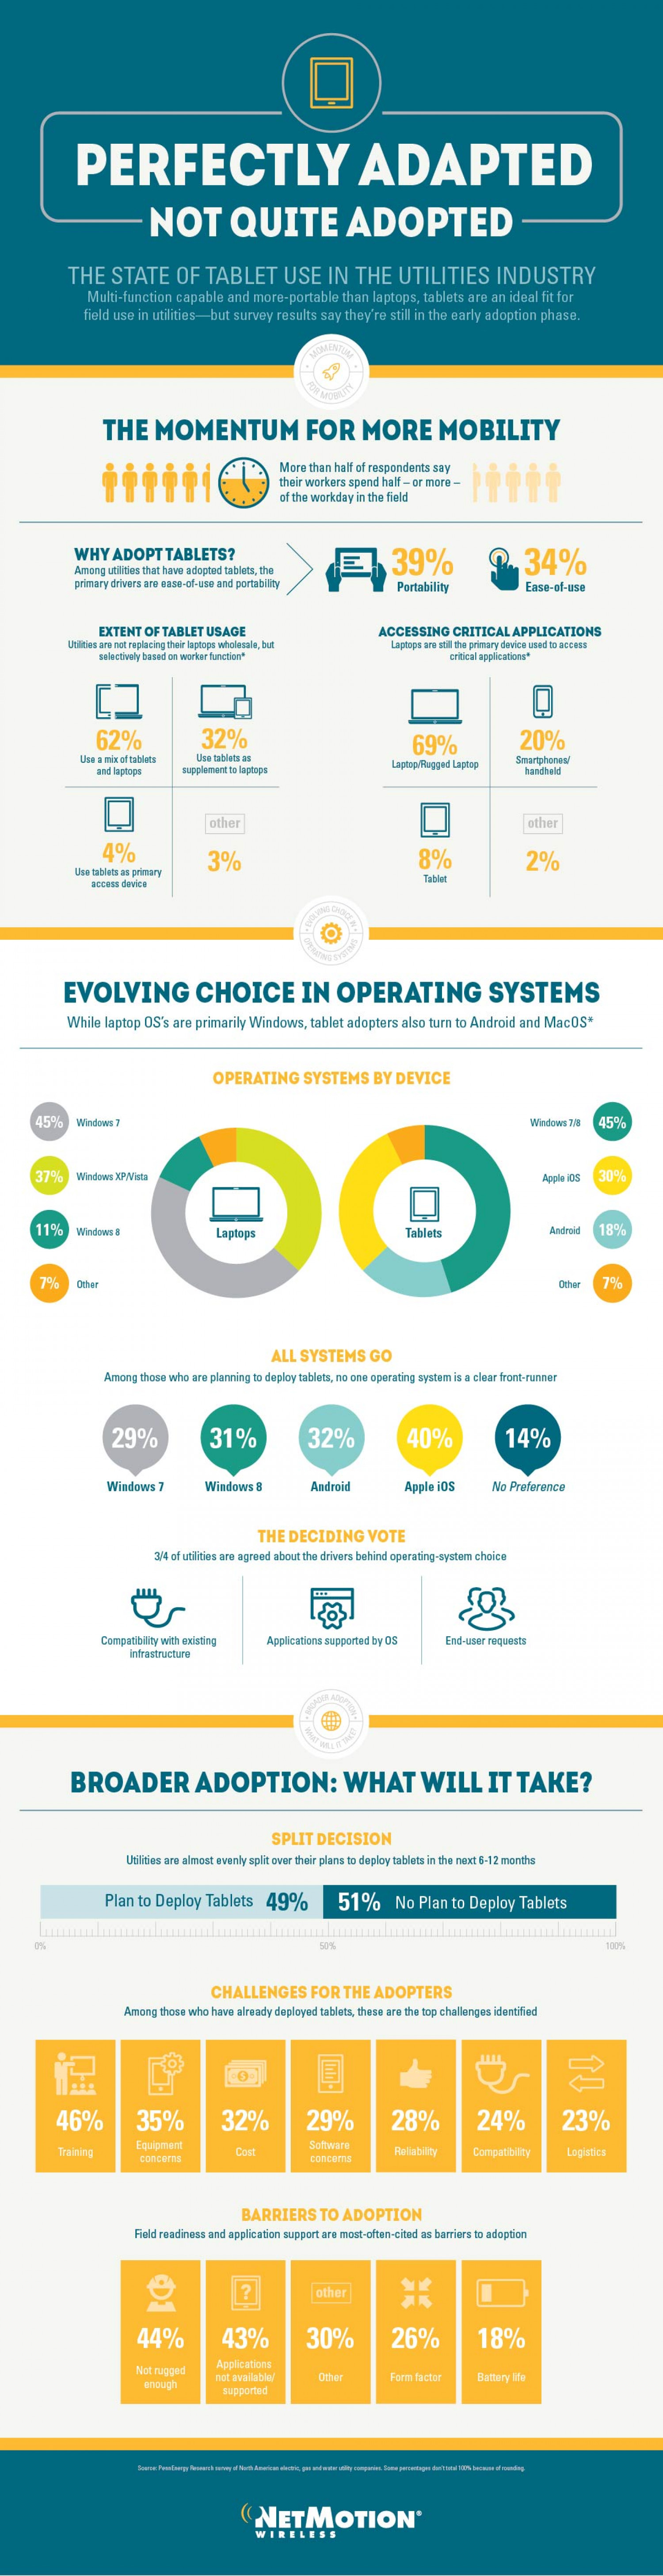 The State of Tablet Use in the Utilities Industry Infographic